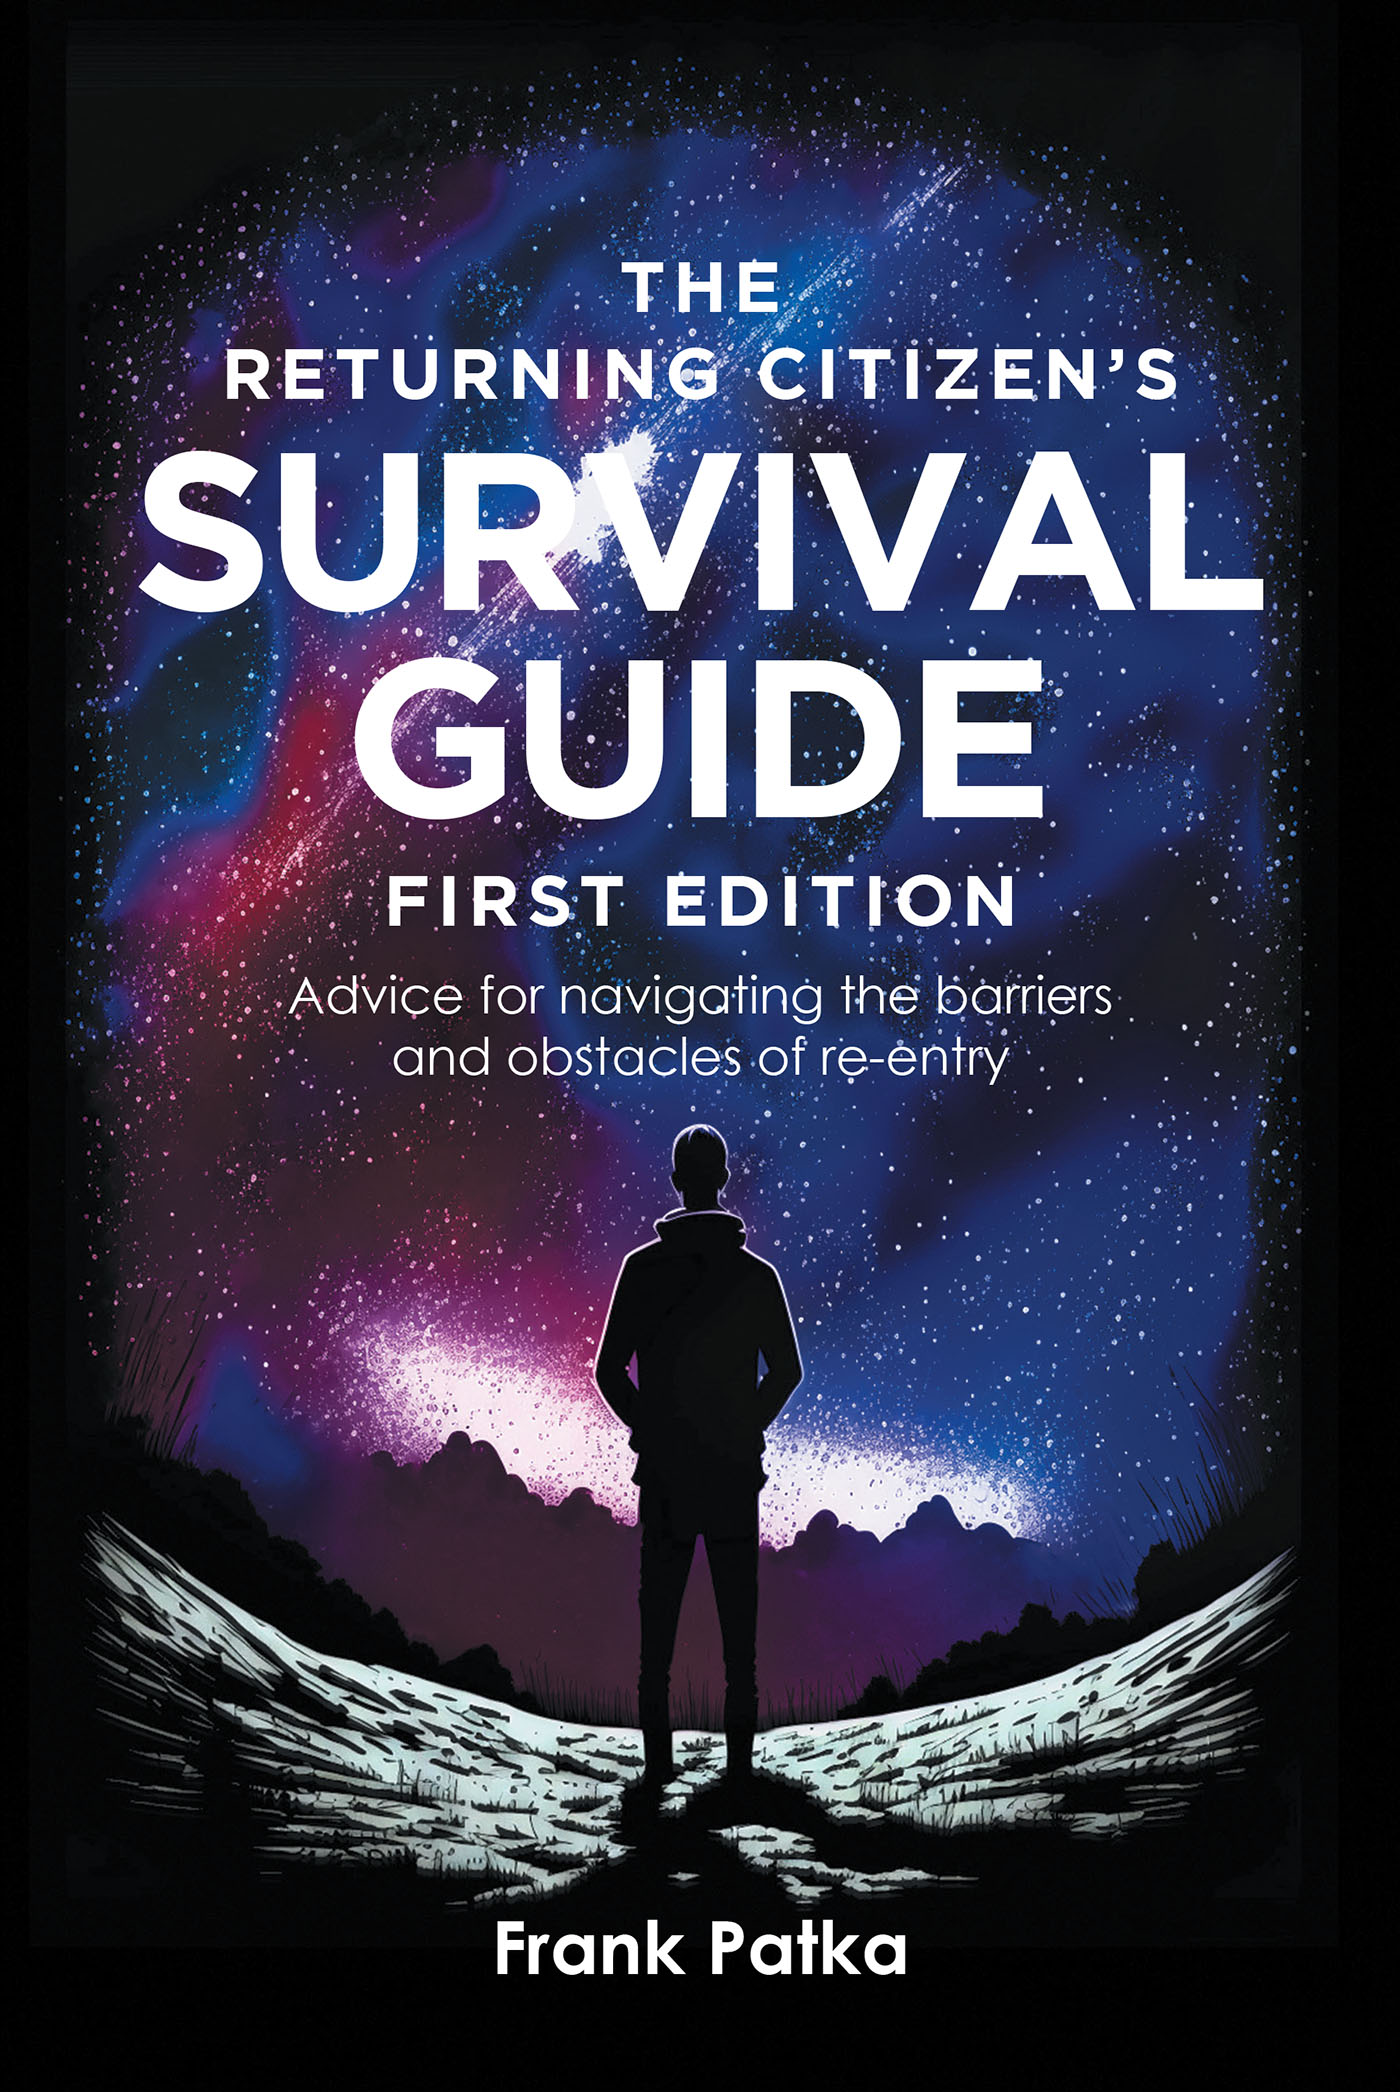 Author Frank Patka’s New Book, “The Returning Citizen’s Survival Guide: First Edition,” Offers Advice for Navigating the Barriers and Obstacles of Re-Entry